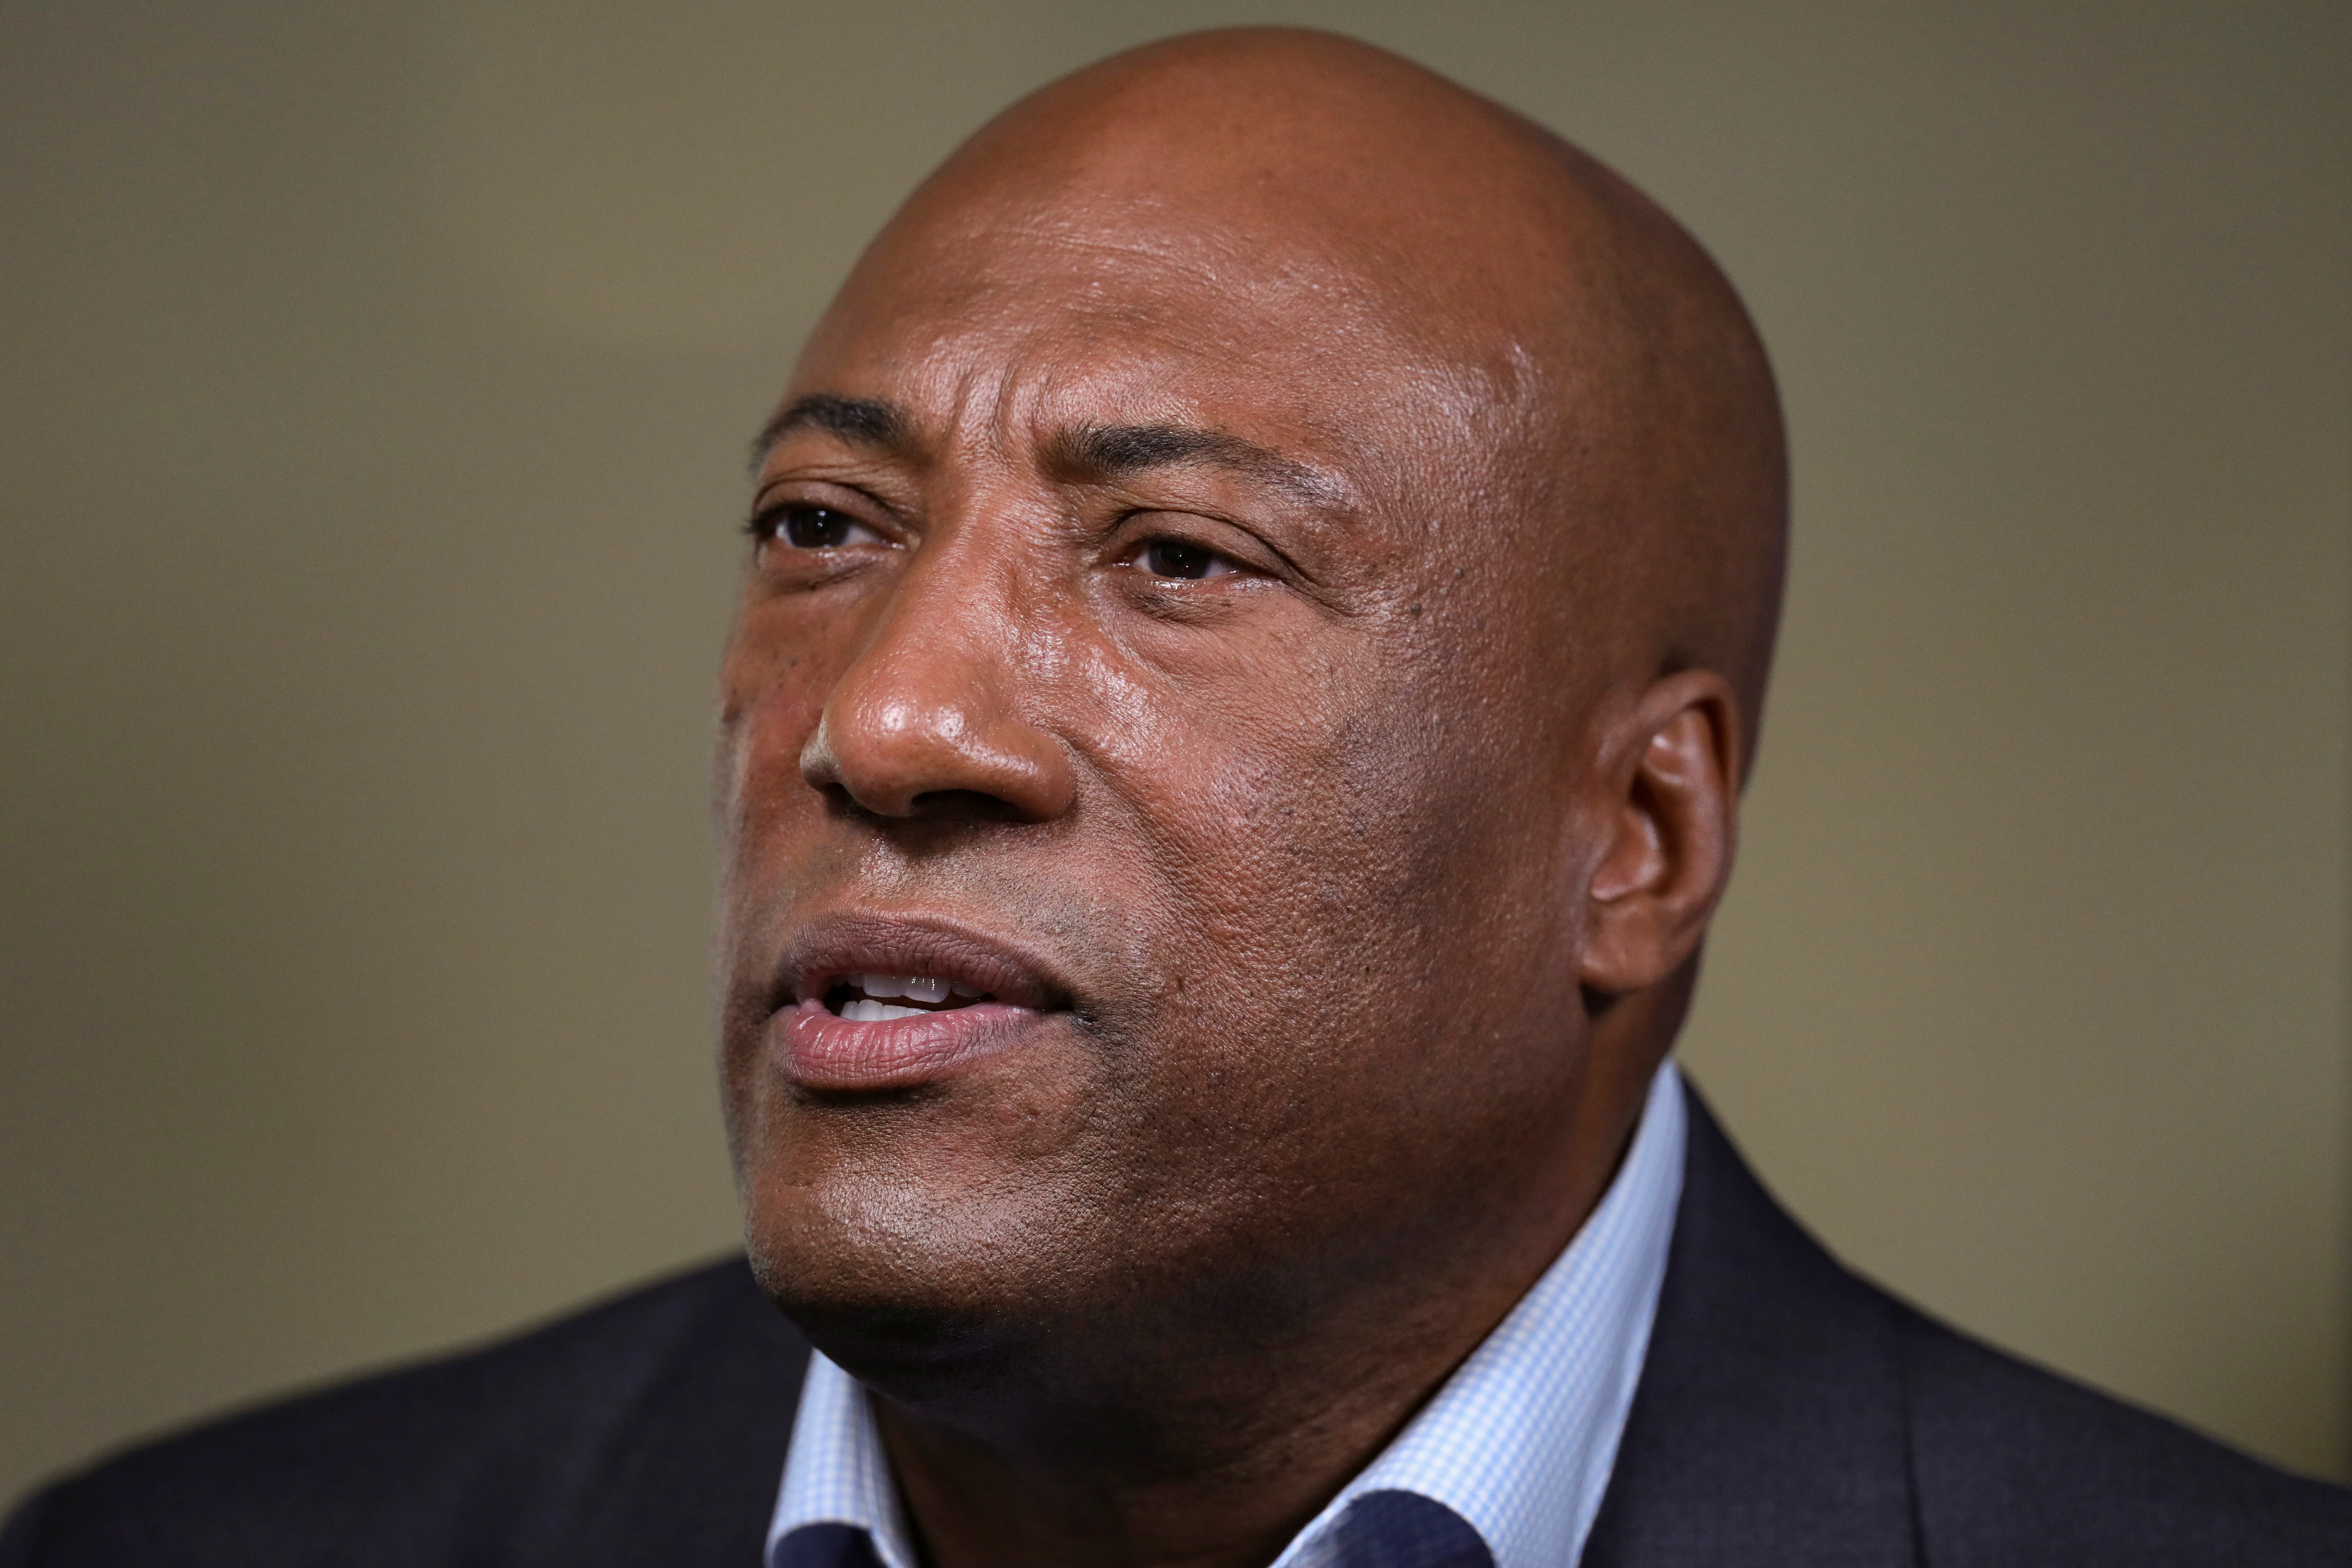 Byron Allen, Founder, Chairman and CEO of Entertainment Studios and Allen Media Group, speaks at the 2021 Milken Institute Global Conference in Beverly Hills, California, U.S., October 19, 2021. REUTERS/David Swanson